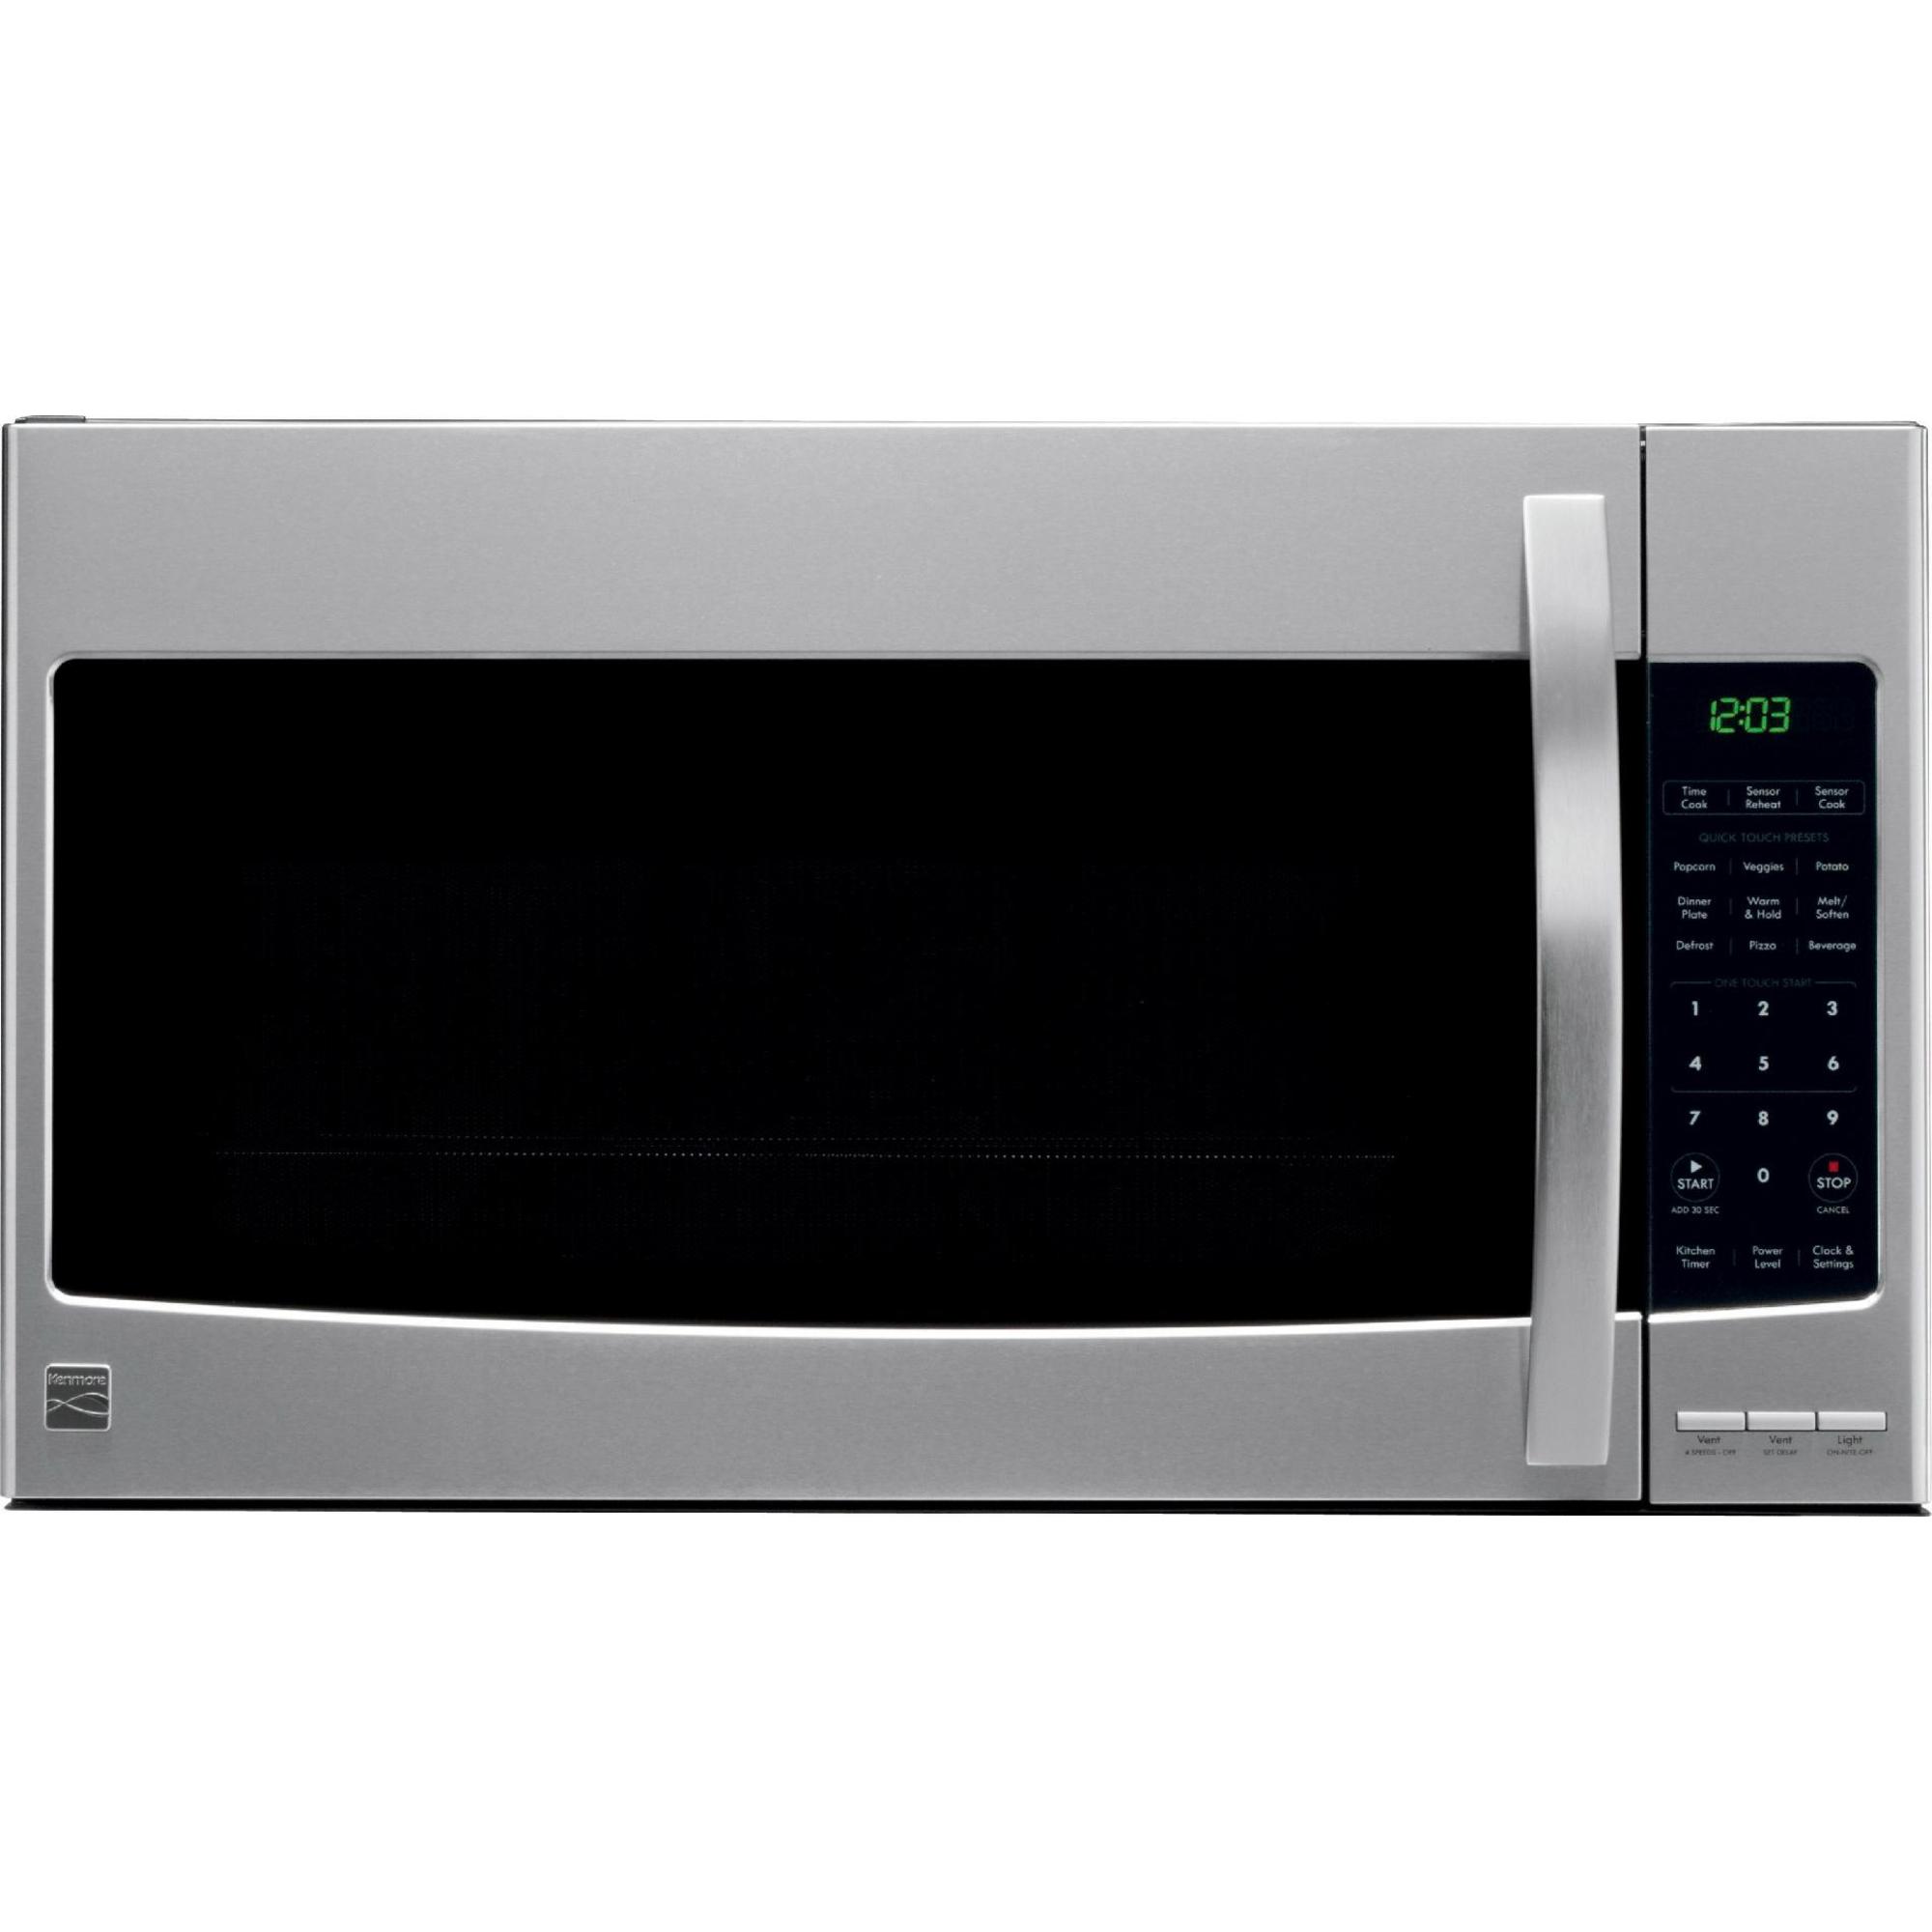 Kenmore 80353 2.1 cu. ft. Over-the-Range Microwave-Sears